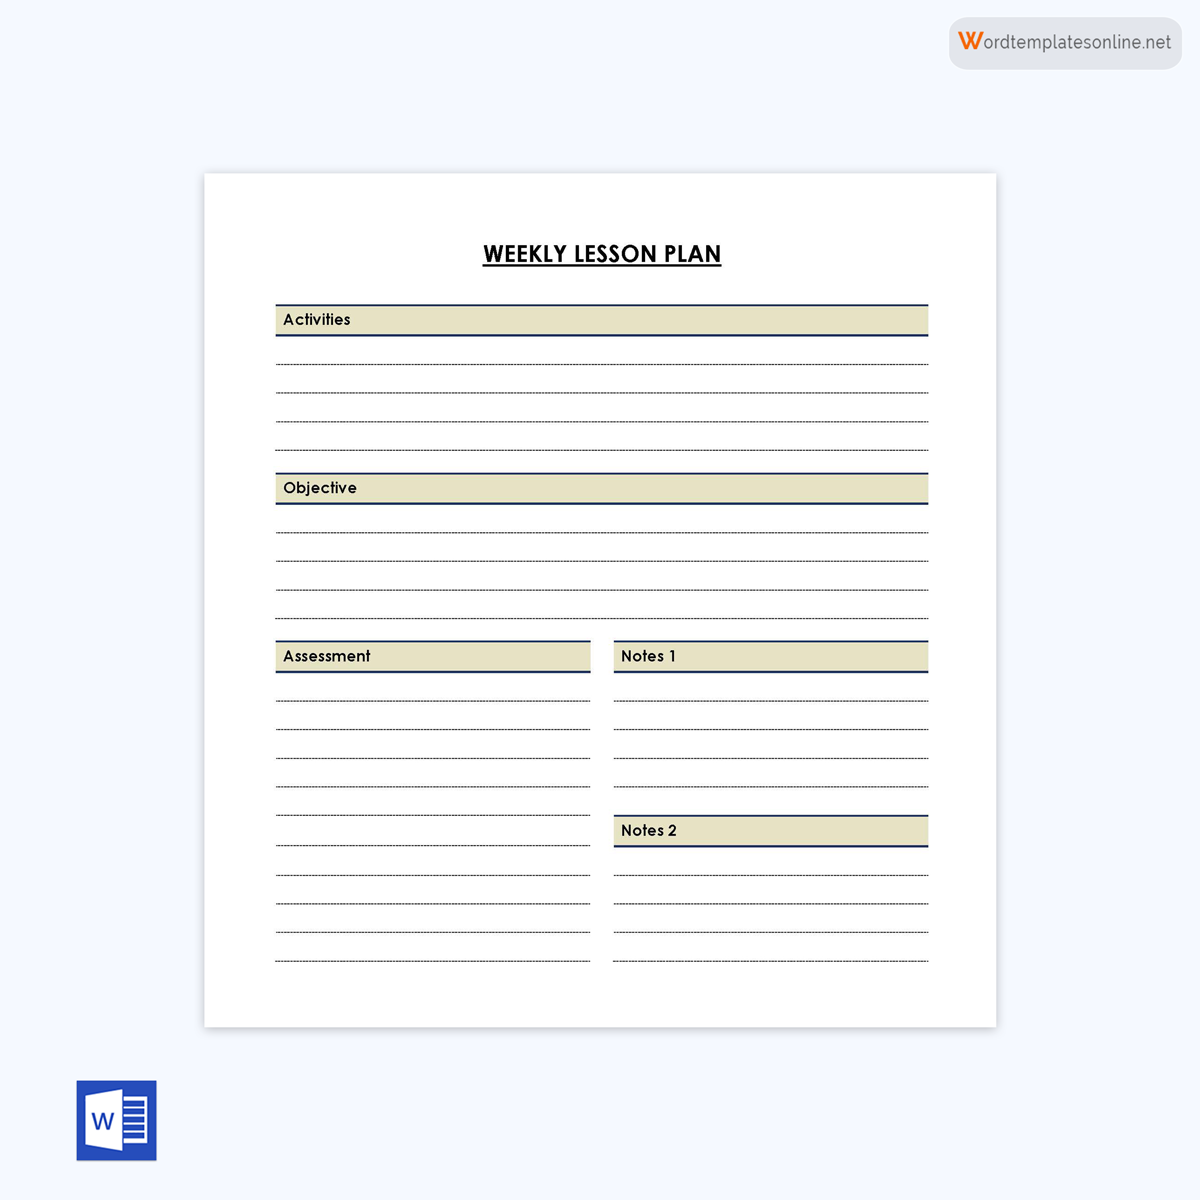 Free Weekly Lesson Plan Template 11 for Word File